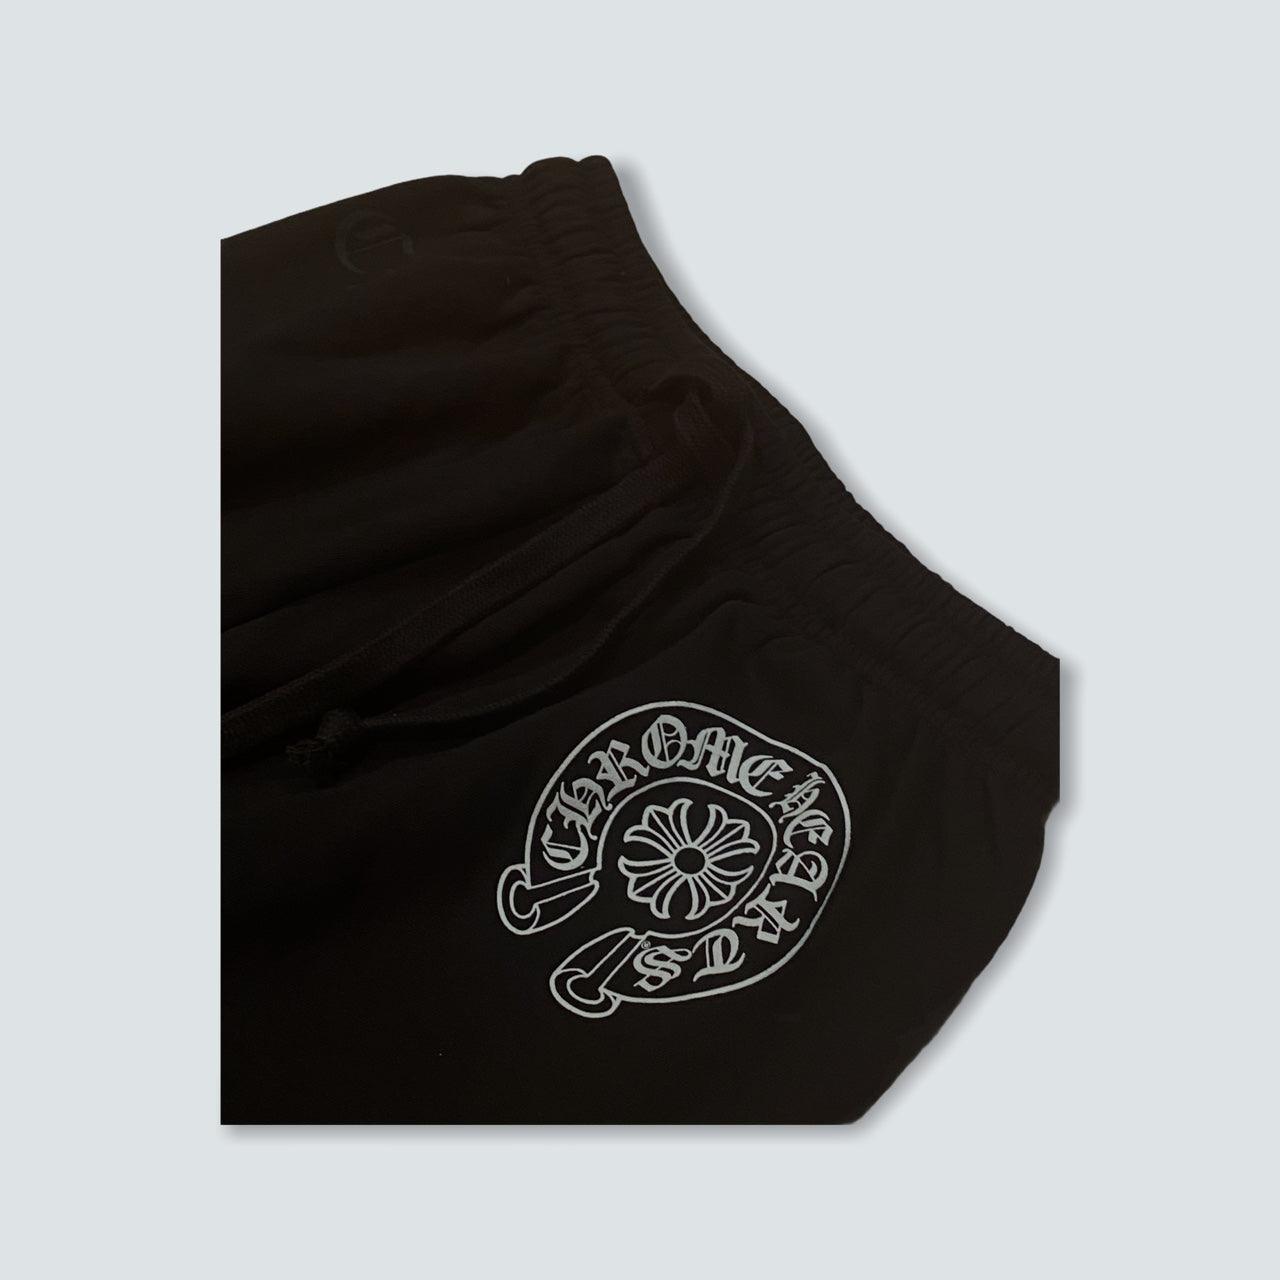 Chrome hearts joggers (M) - Known Source